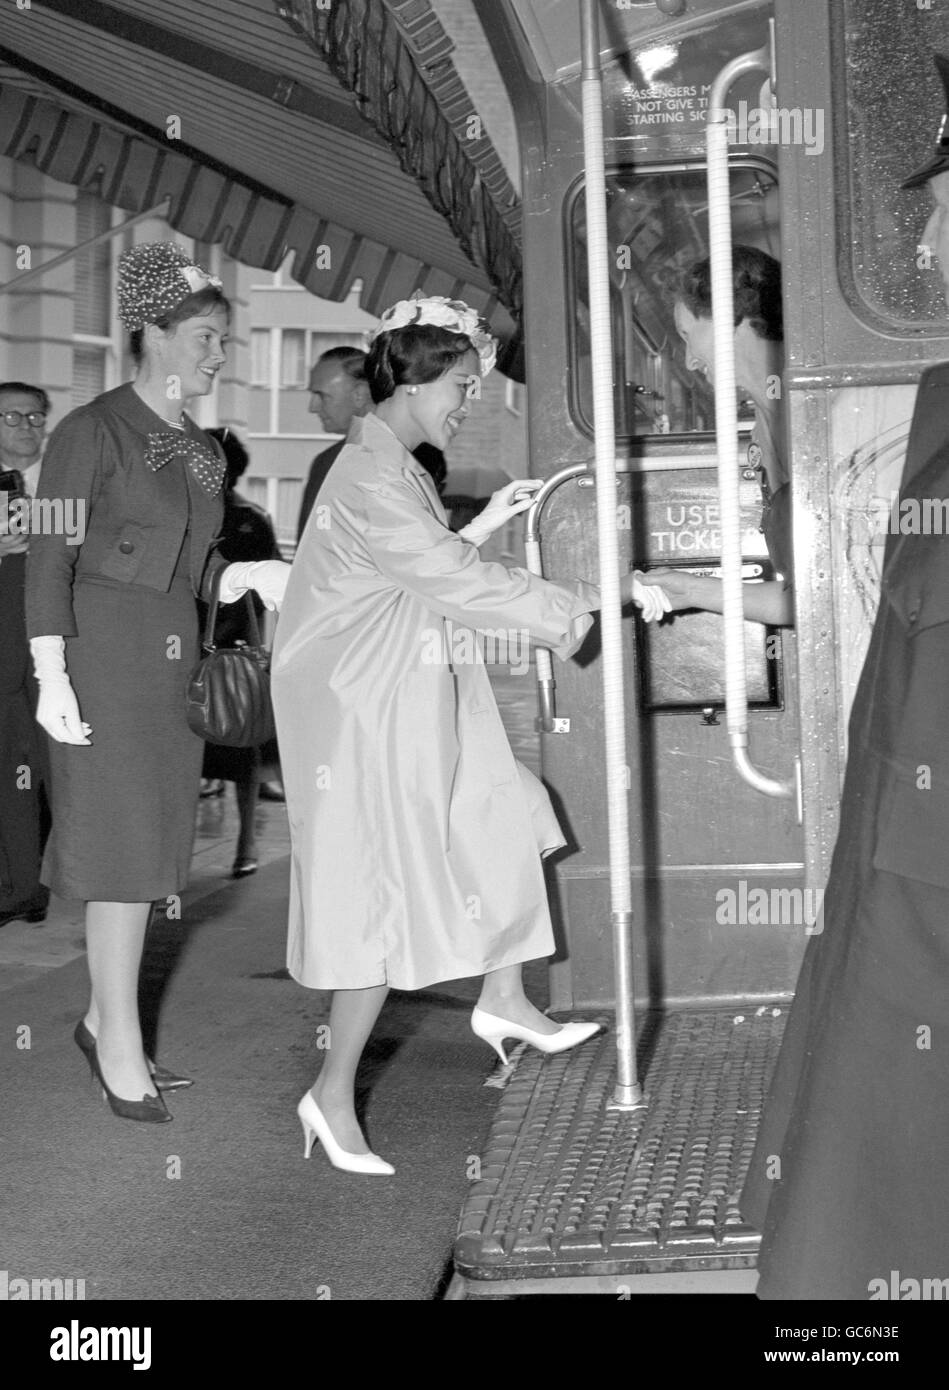 Queen Sirikit, consort of Thai monarch King Bhumibol Aduladej, steps aboard a London bus after attending a reception at the Thai Embassy in Kensington, London. The bus, on private charter, was believed to be taking the Queen on a tour of London. Stock Photo